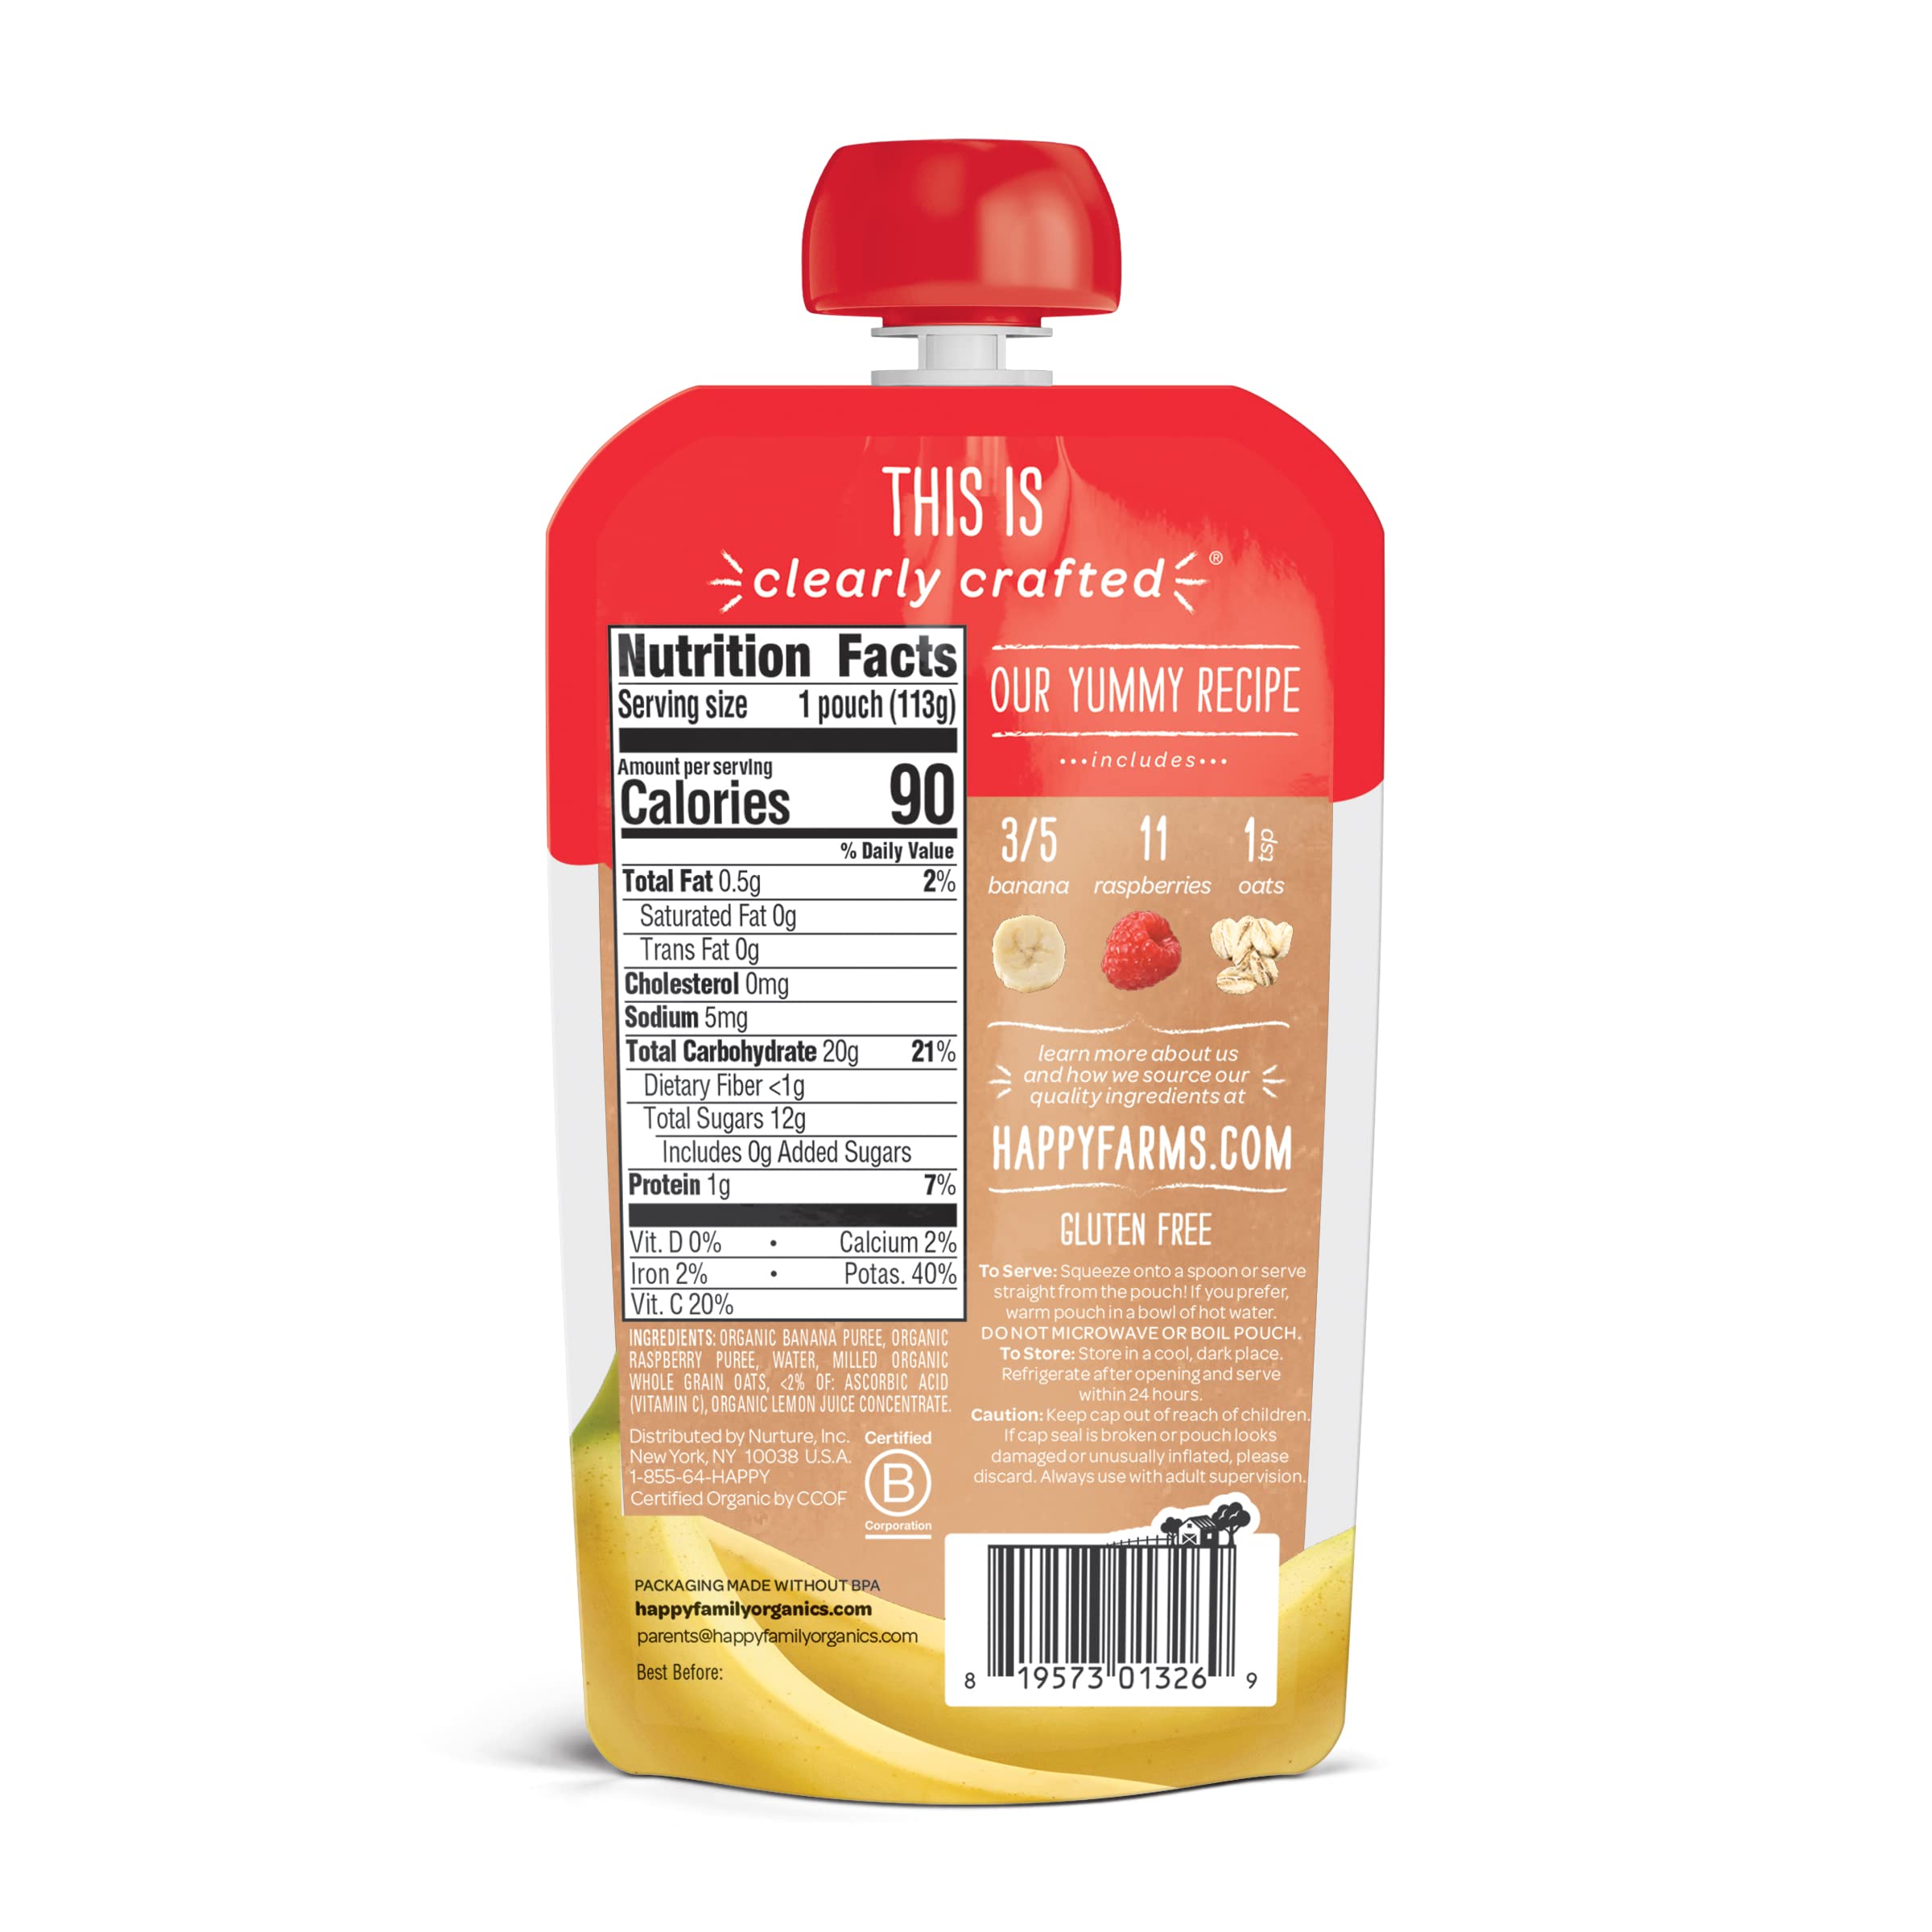 Happy Baby Organics Clearly Crafted Stage 2 Baby Food, Bananas, Raspberries & Oats (Pack of 16) & Happy Tot Organics Super Morning Stage 4, Apple Cinnamon, Yogurt, Oats Pack of 8)